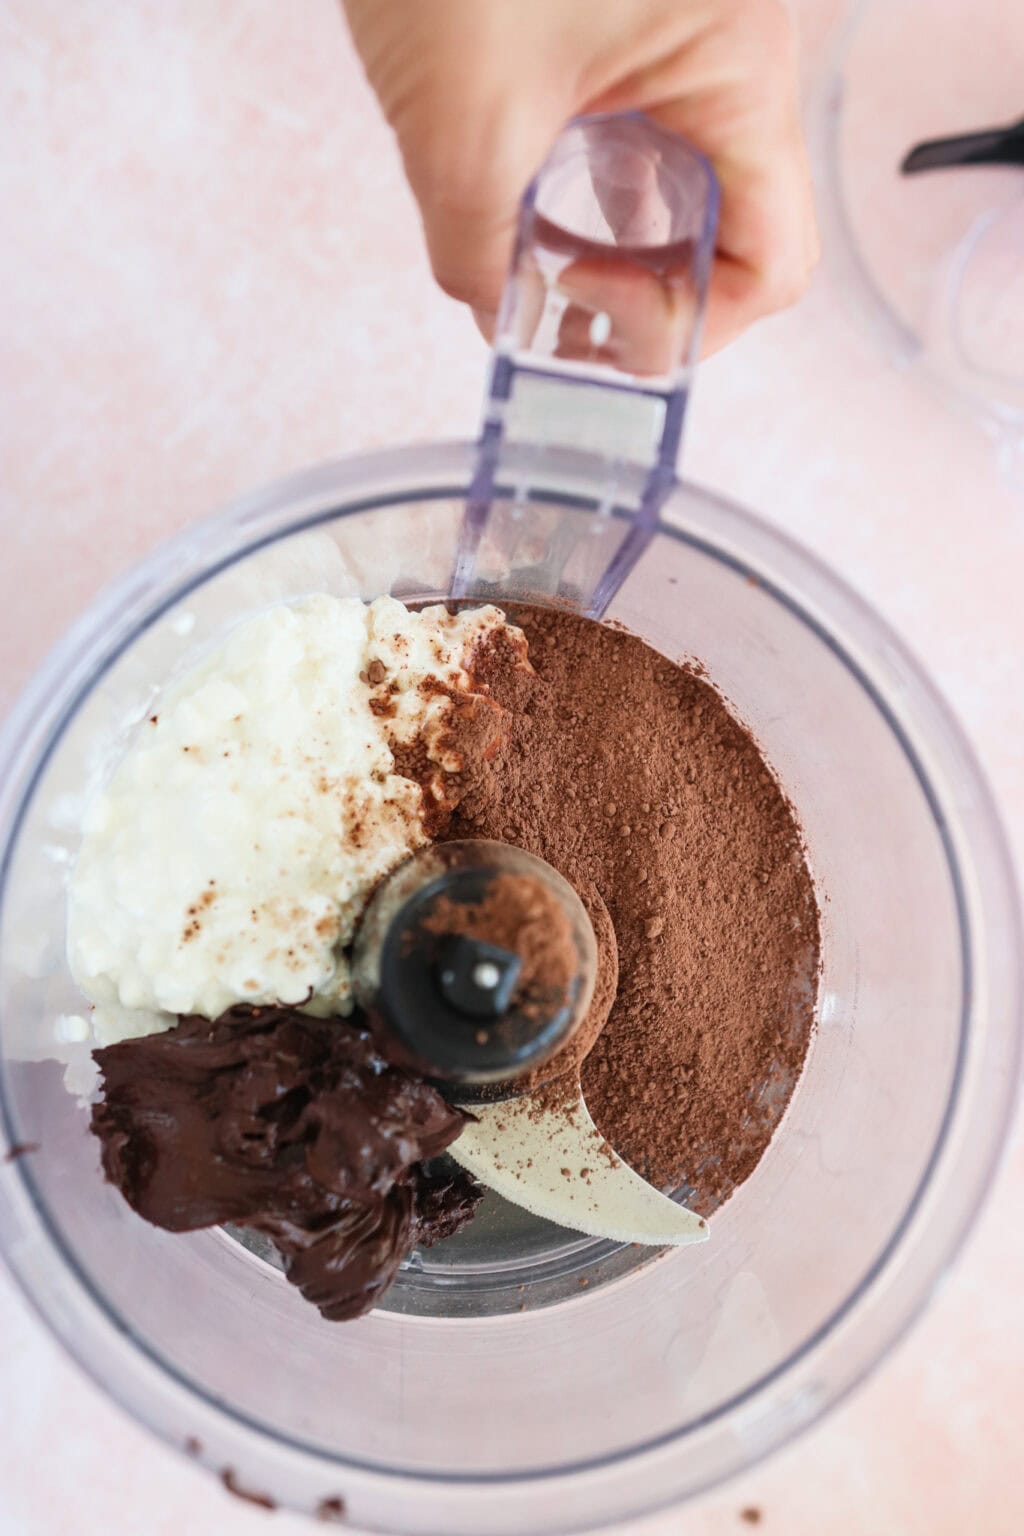 Ingredients for 5-Minute Cottage Cheese Chocolate Mousse unmixed in a food processor, including cottage cheese, chocolate chips, and cacao